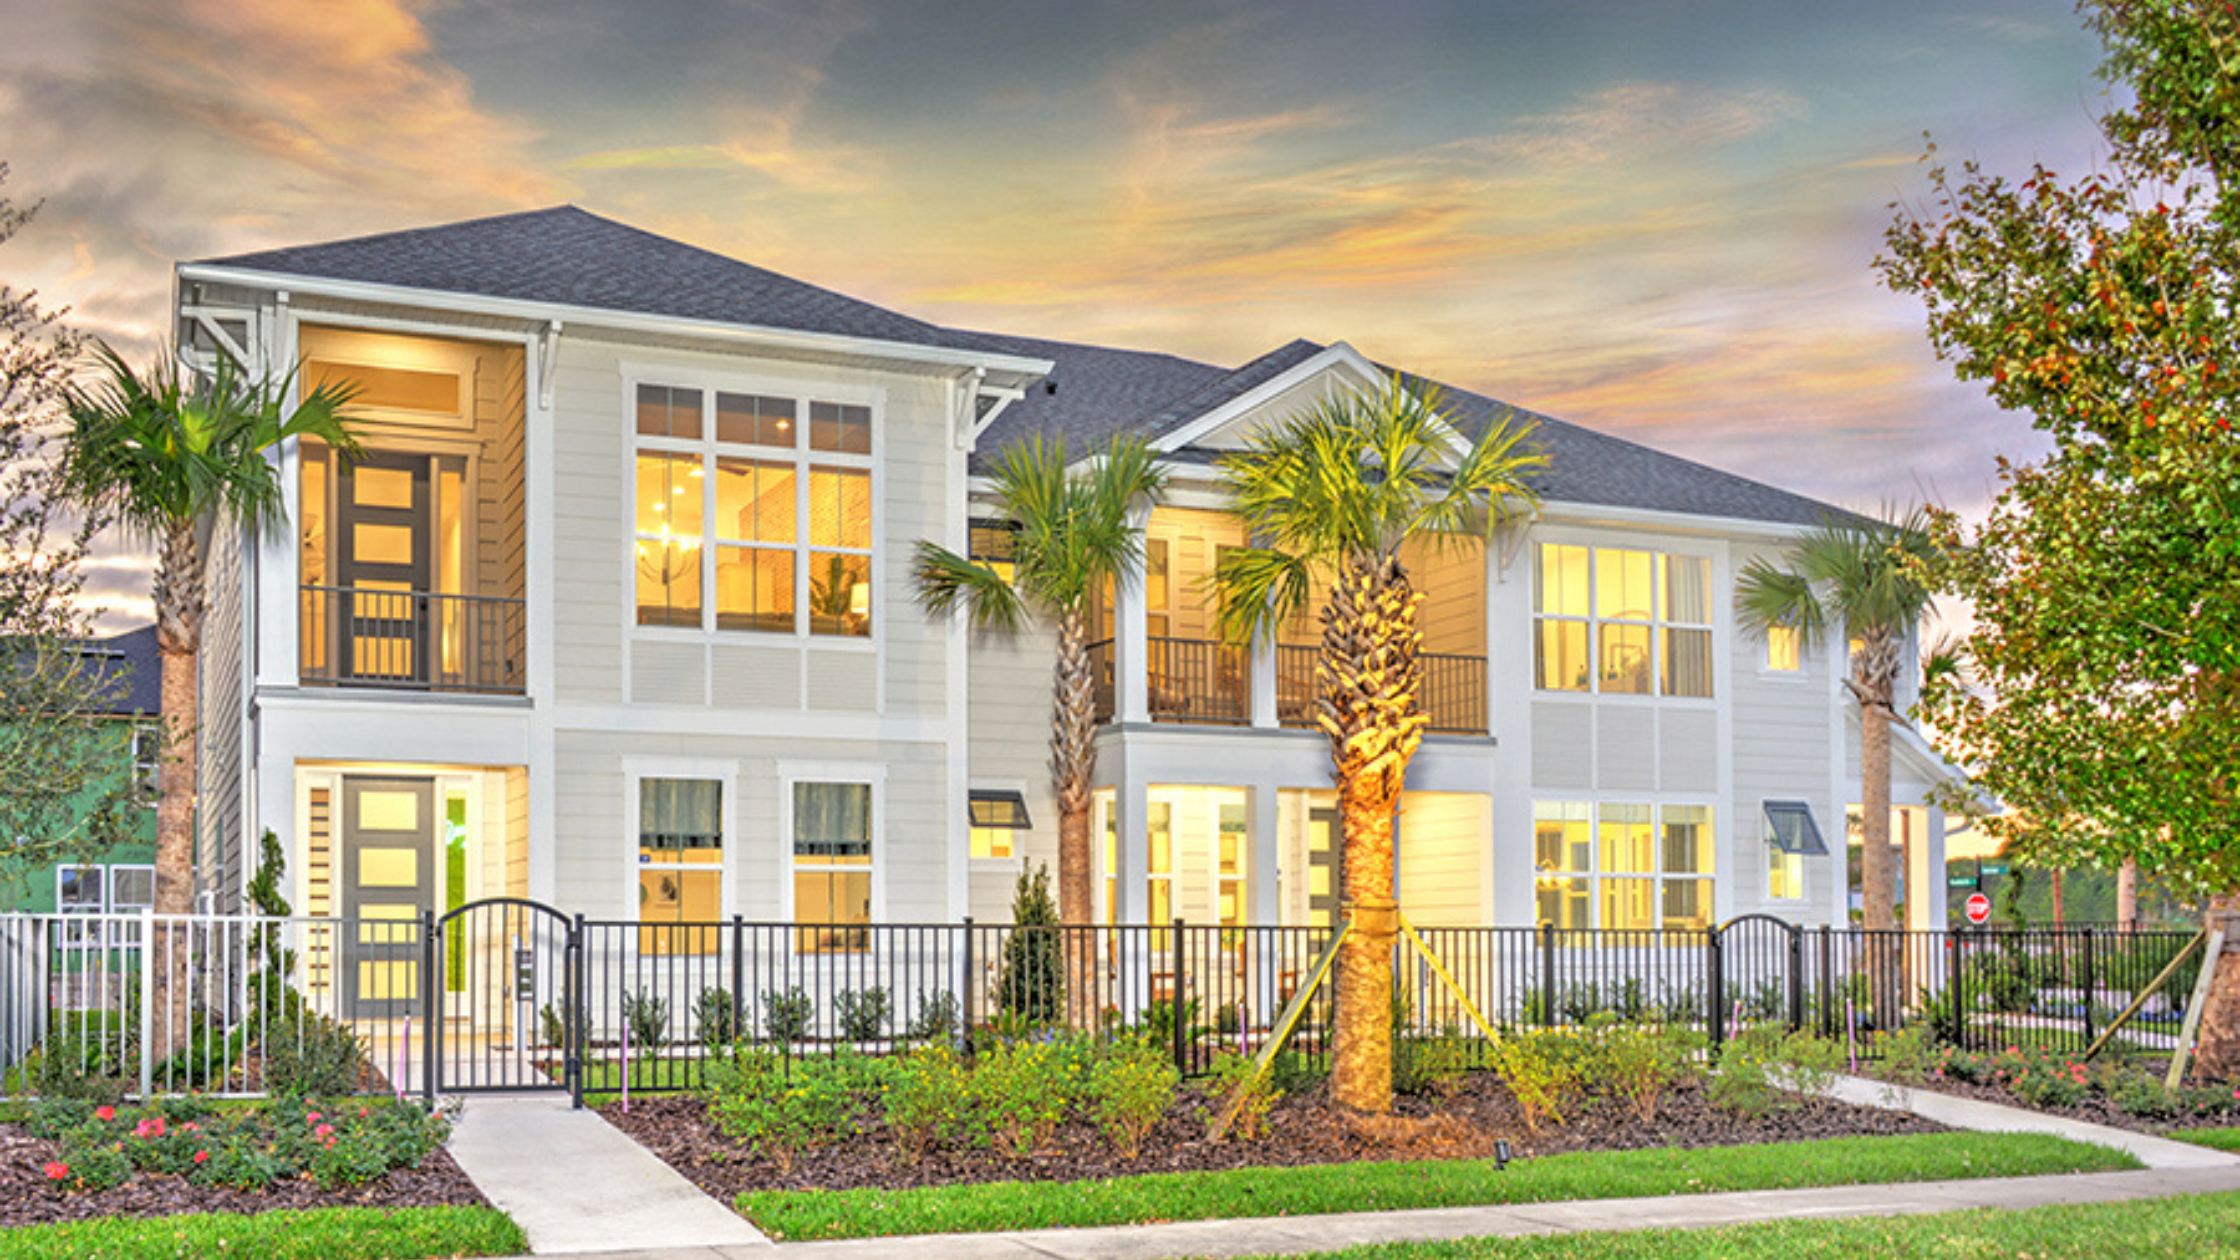 West End’s Community Lifestyle at Nocatee - Untitled design 1